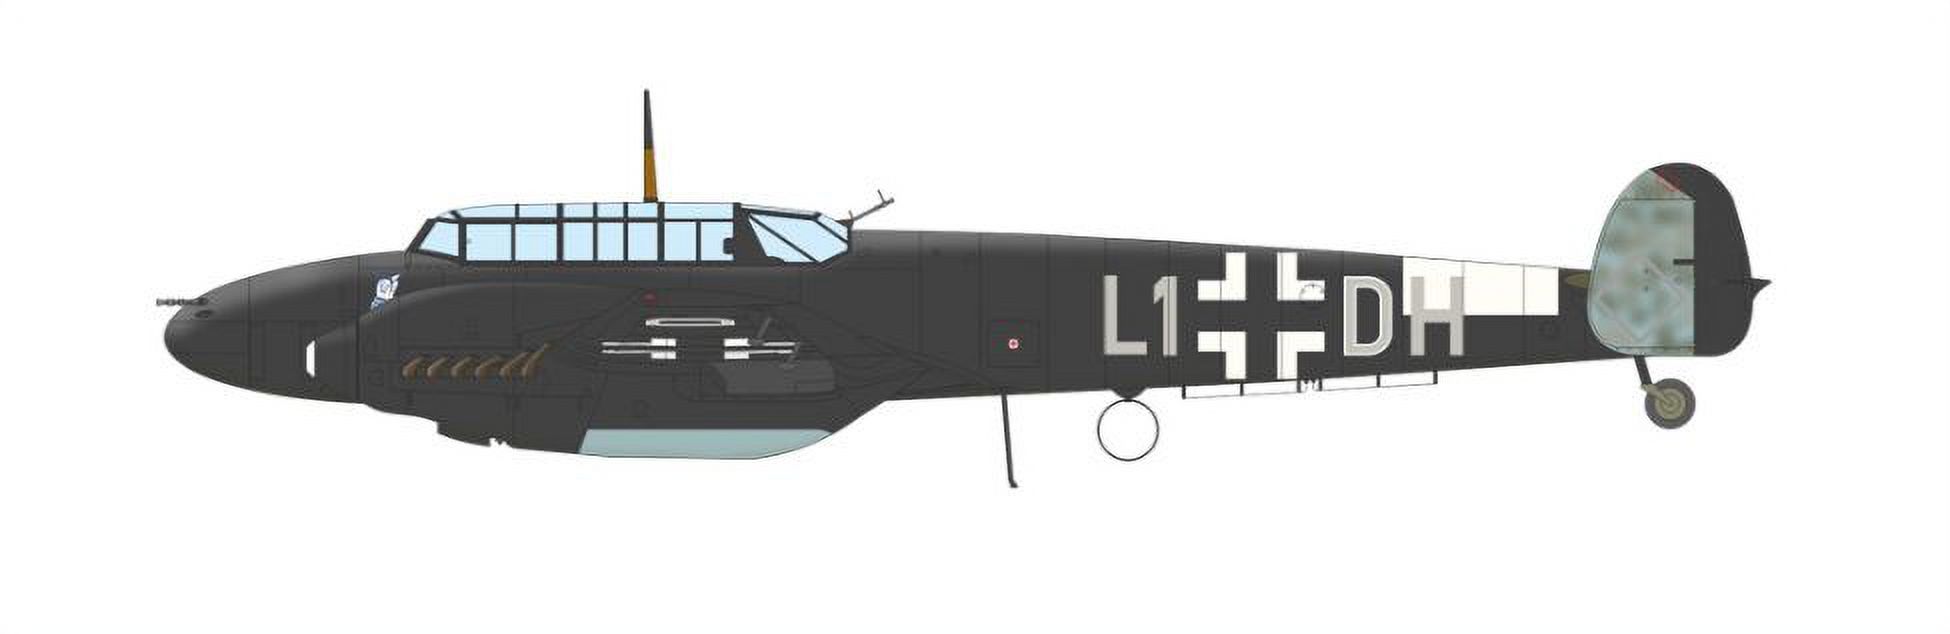 Bf 110C New - image 3 of 5